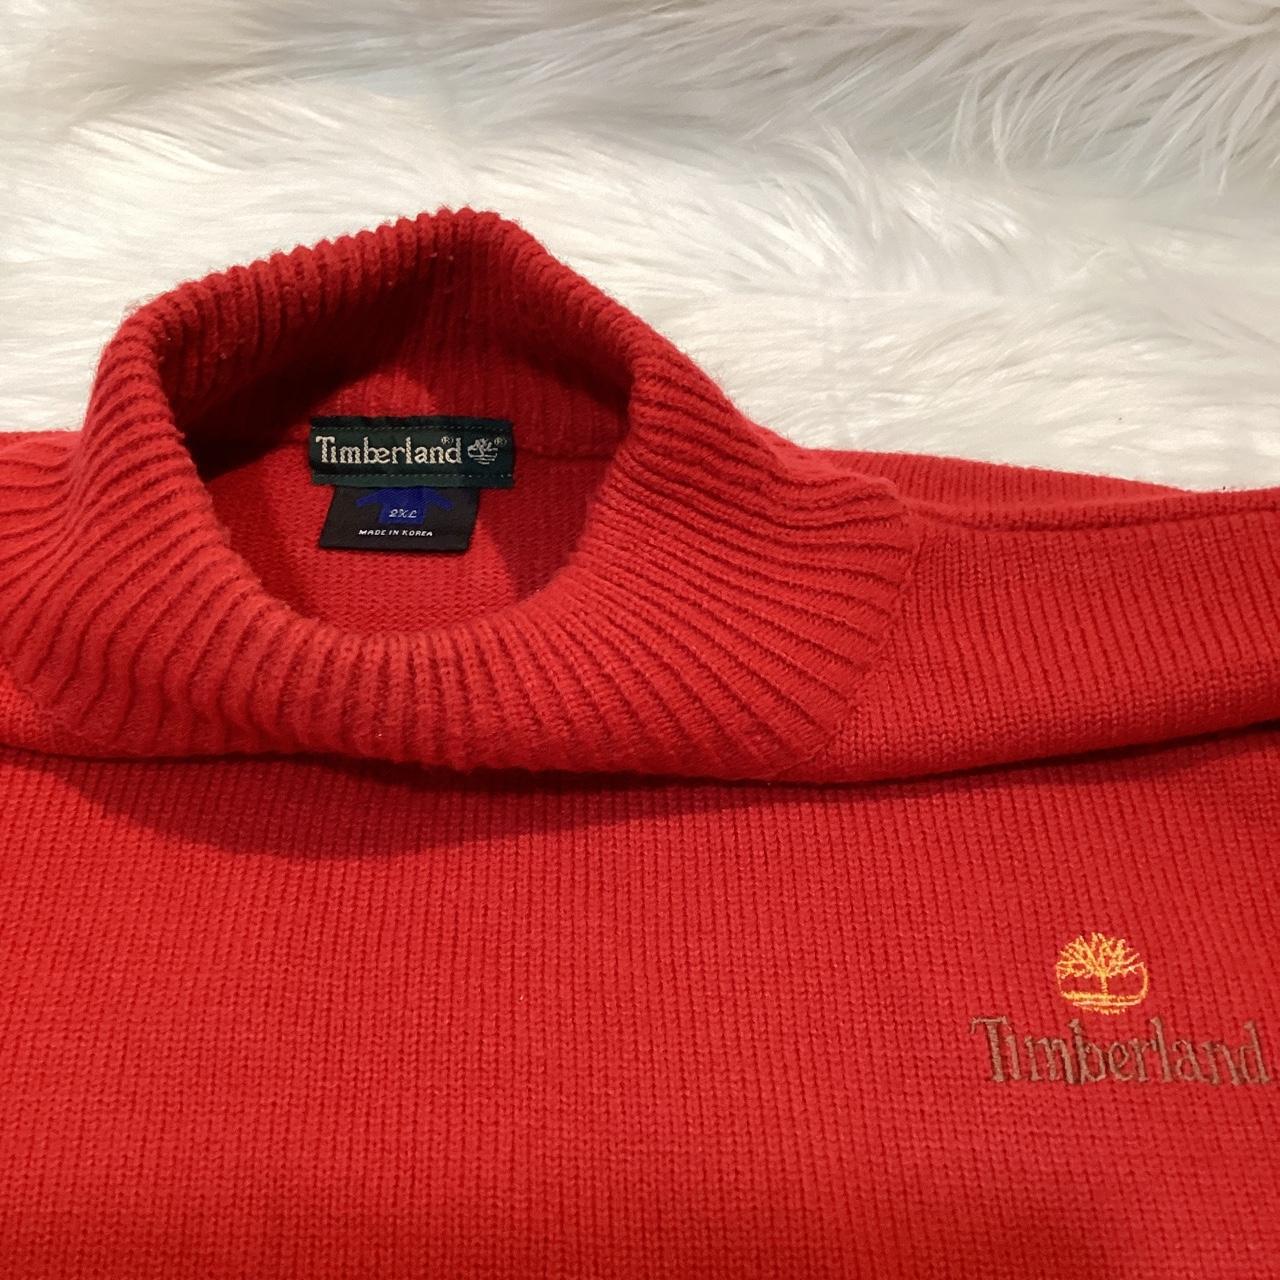 Timberland Men's Red and Grey Jumper (2)